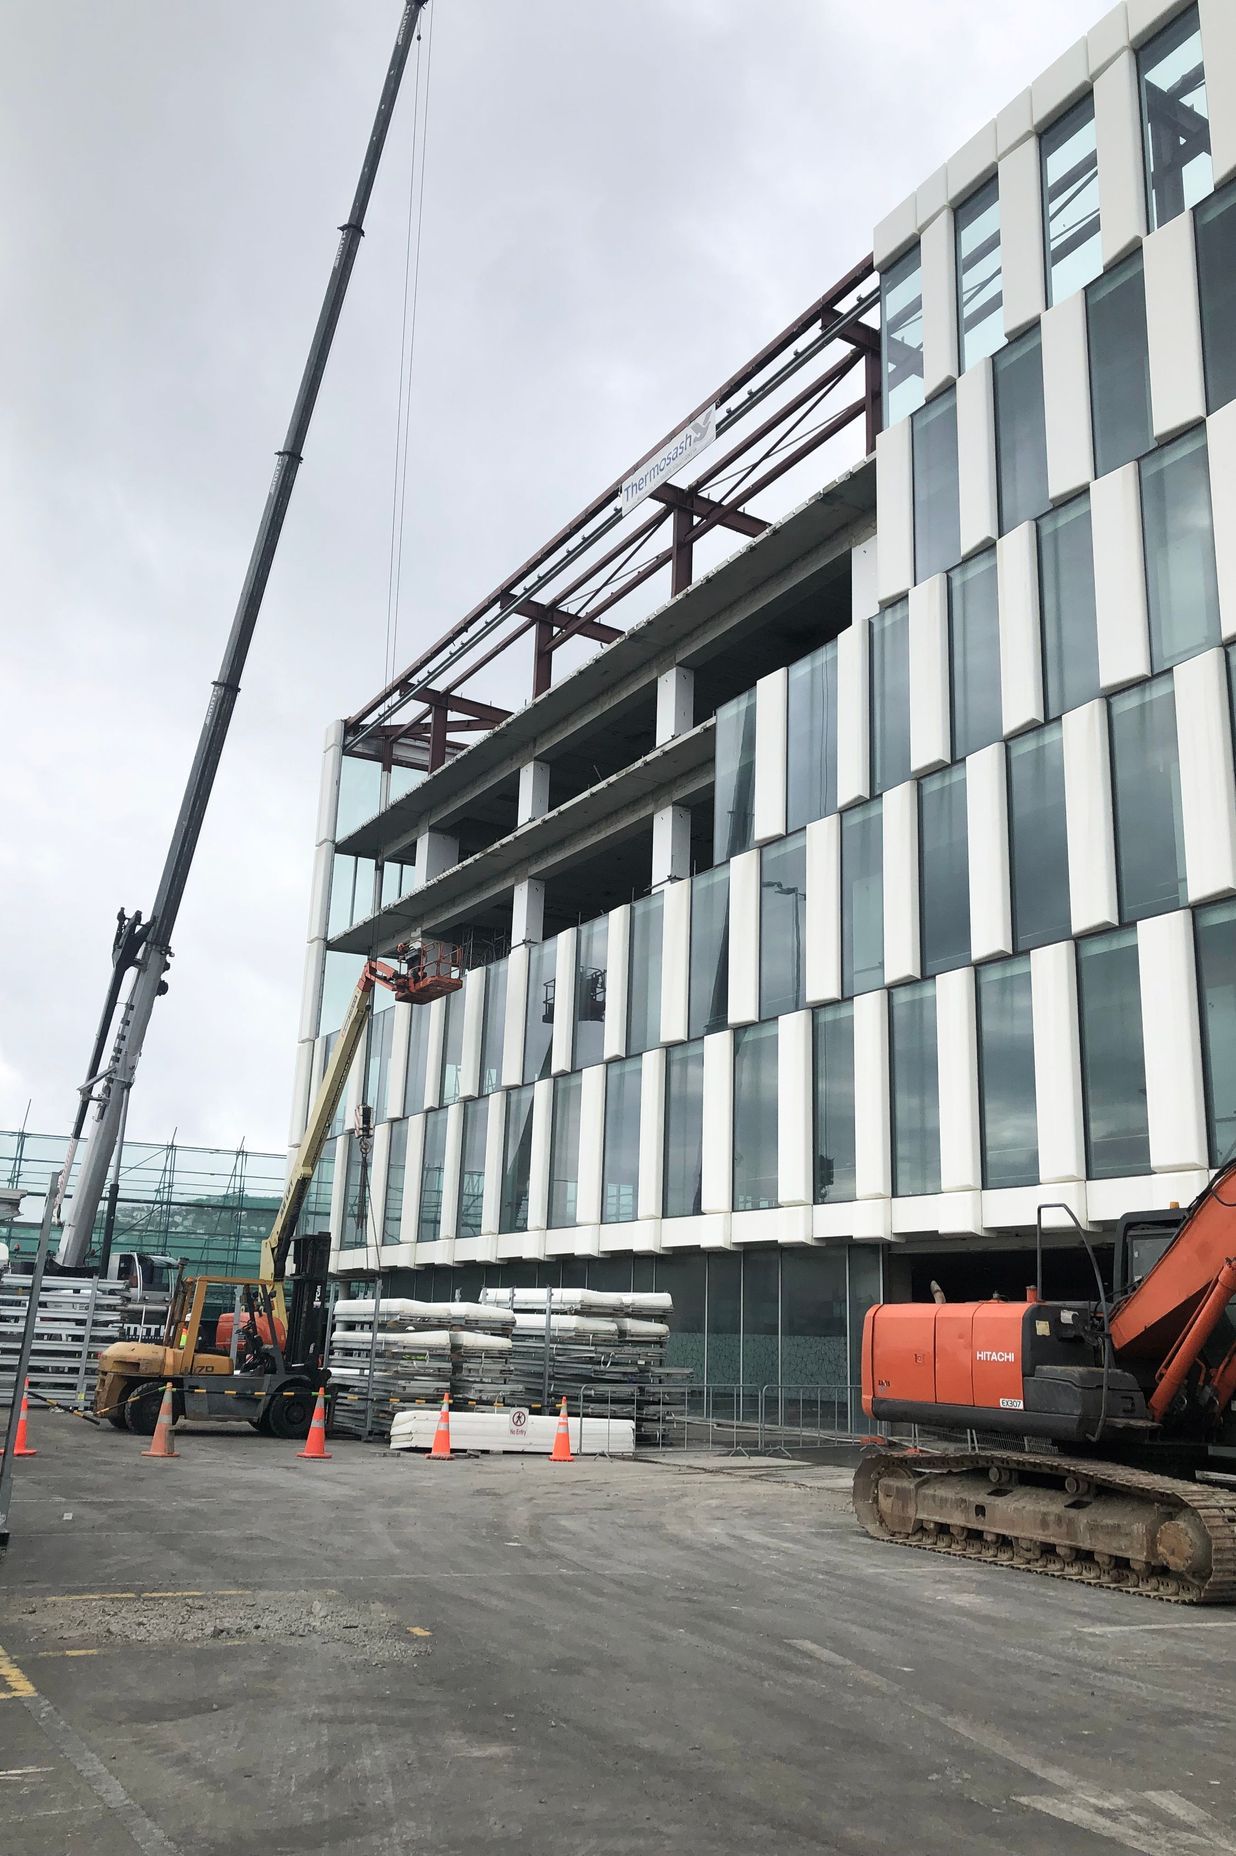 As part of the BNZ deconstruction following the Kaikoura earthquake, the existing unitised panels were removed and reused on the Wellington Children's Hospital project.